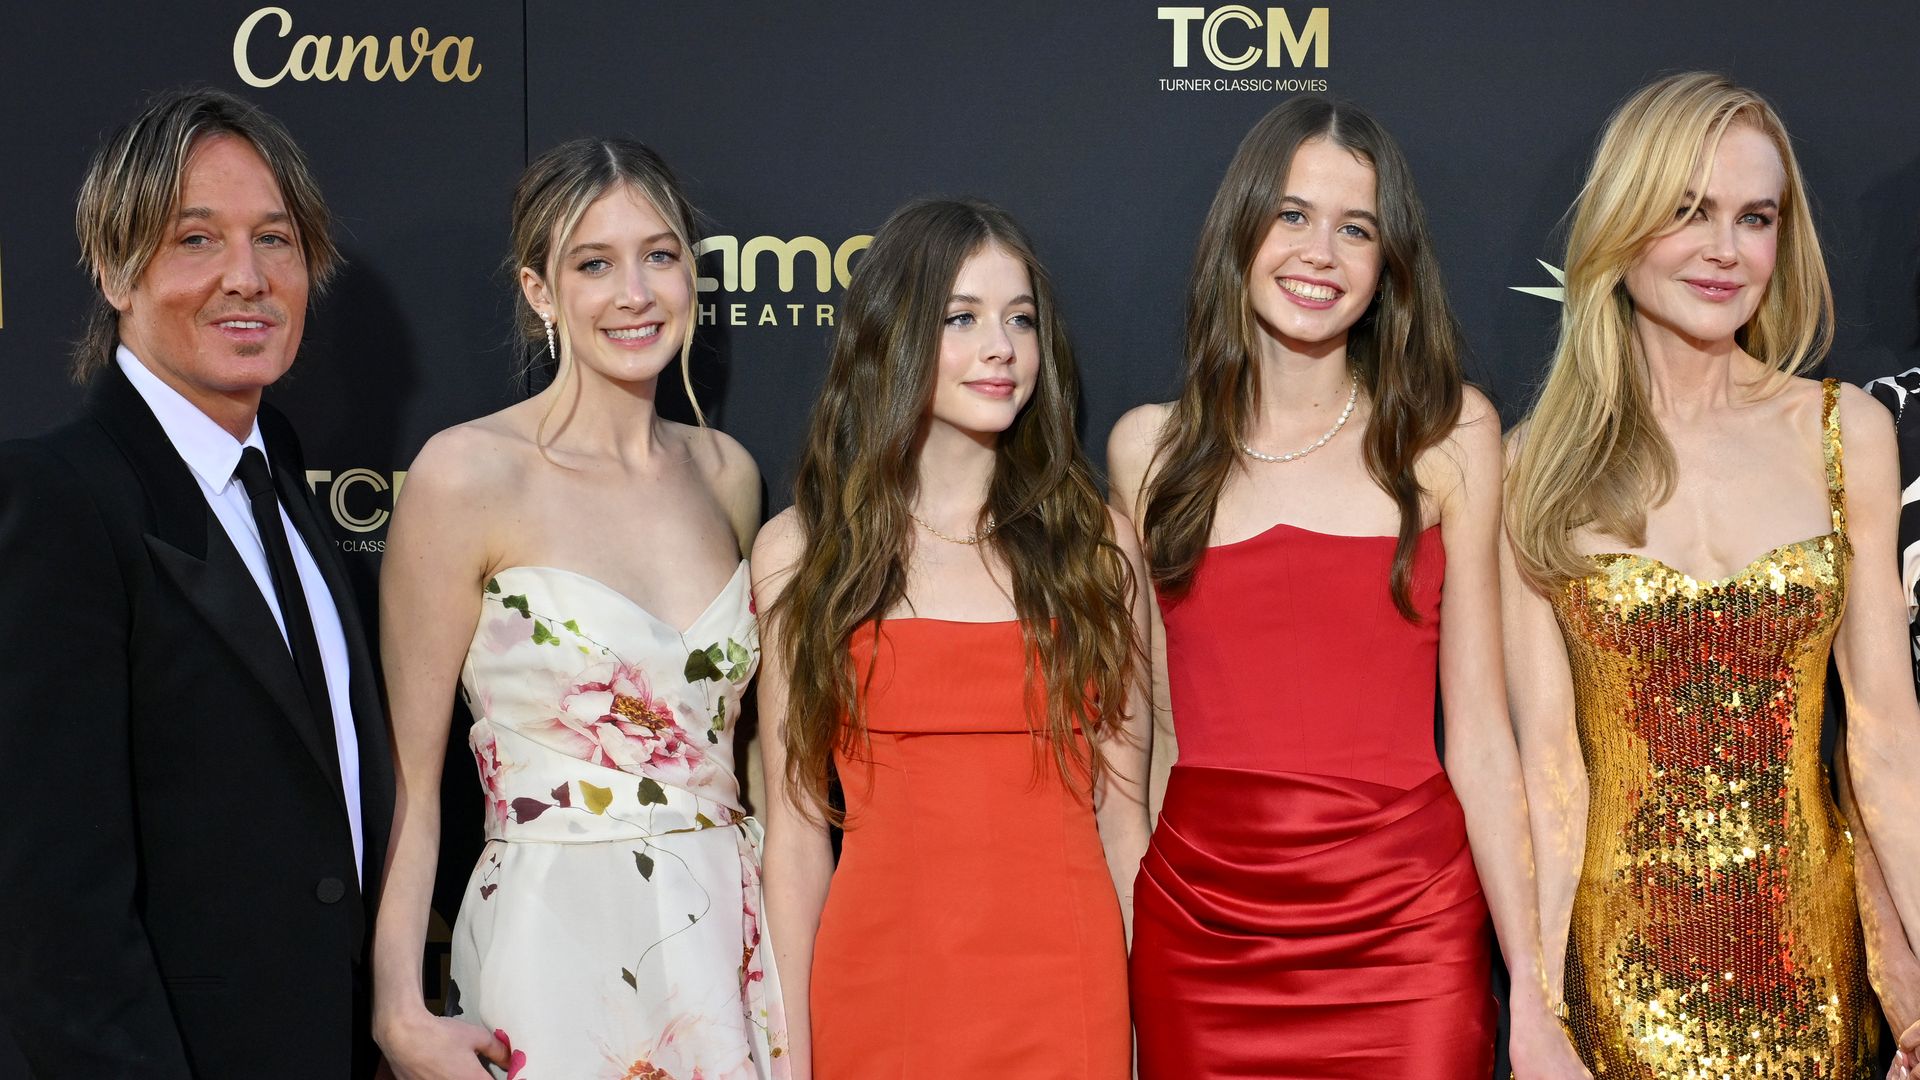 Nicole Kidman and Keith Urban's daughters are as tall as them in must-see gowns for red carpet debut